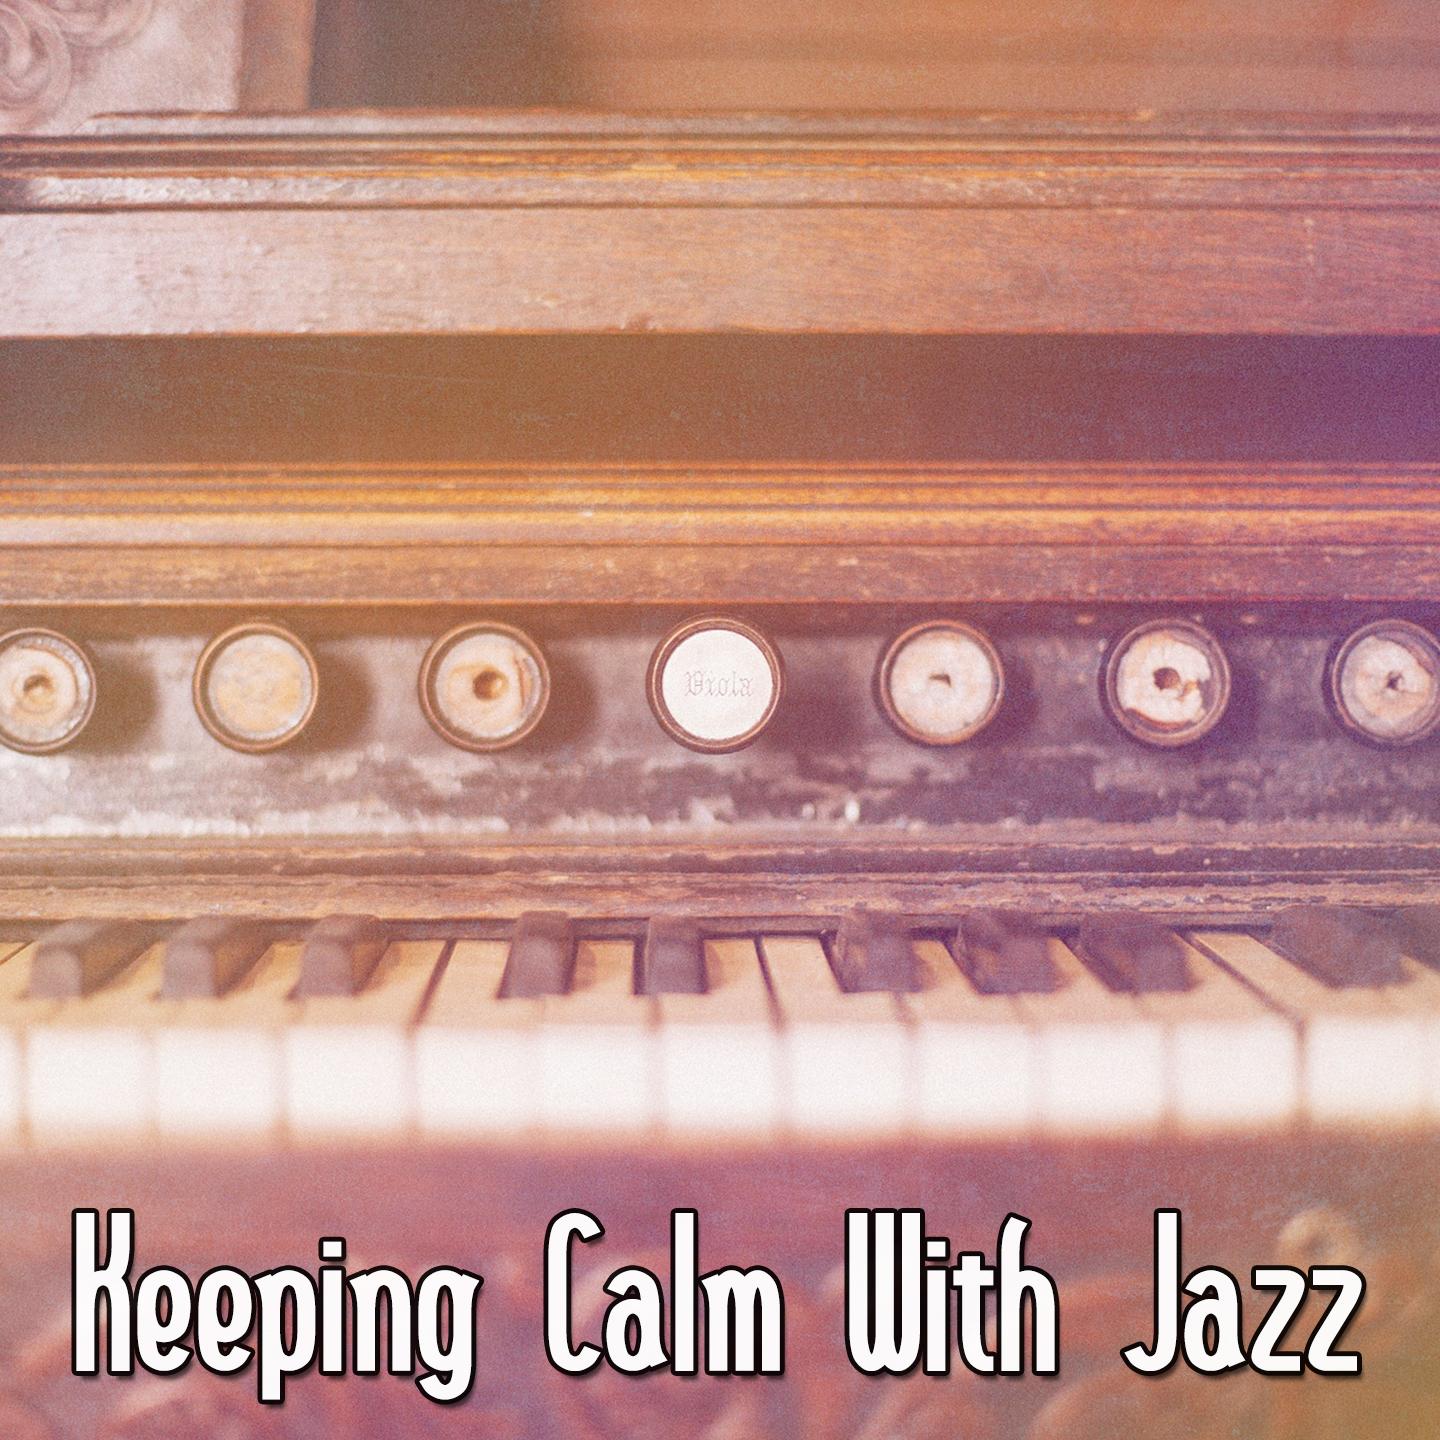 Keeping Calm With Jazz